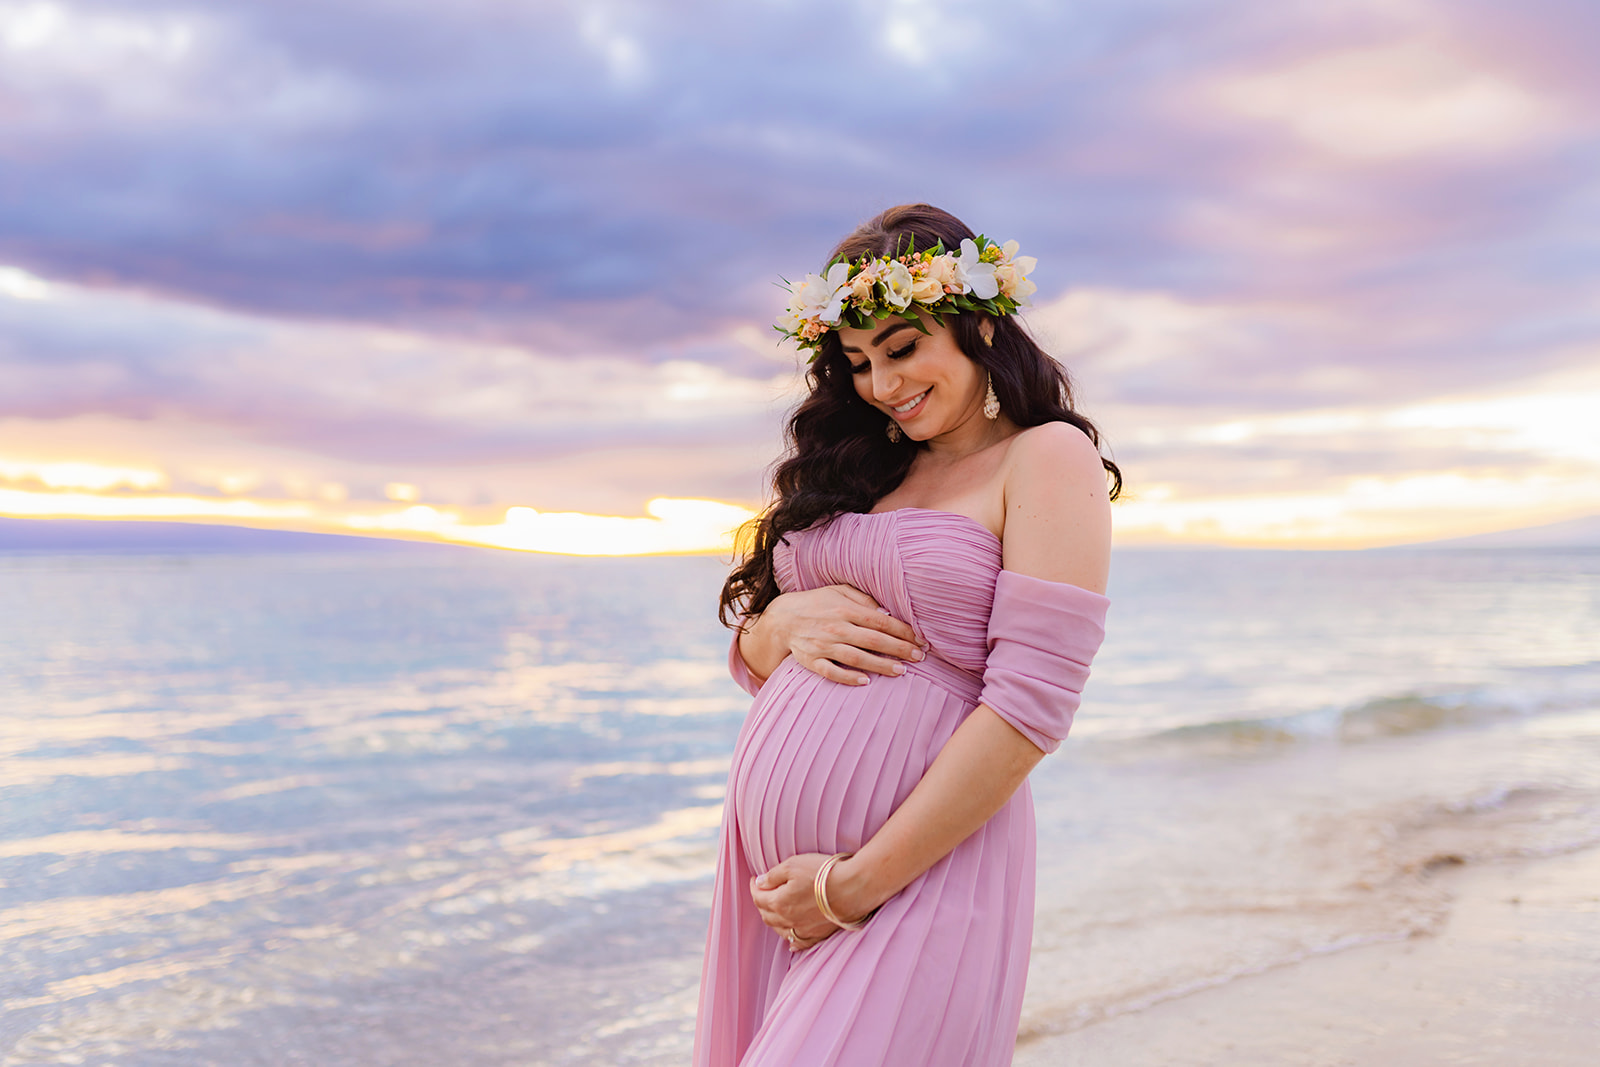 Purple maternity gown as outfit ideas for Hawaii beach maternity pictures.